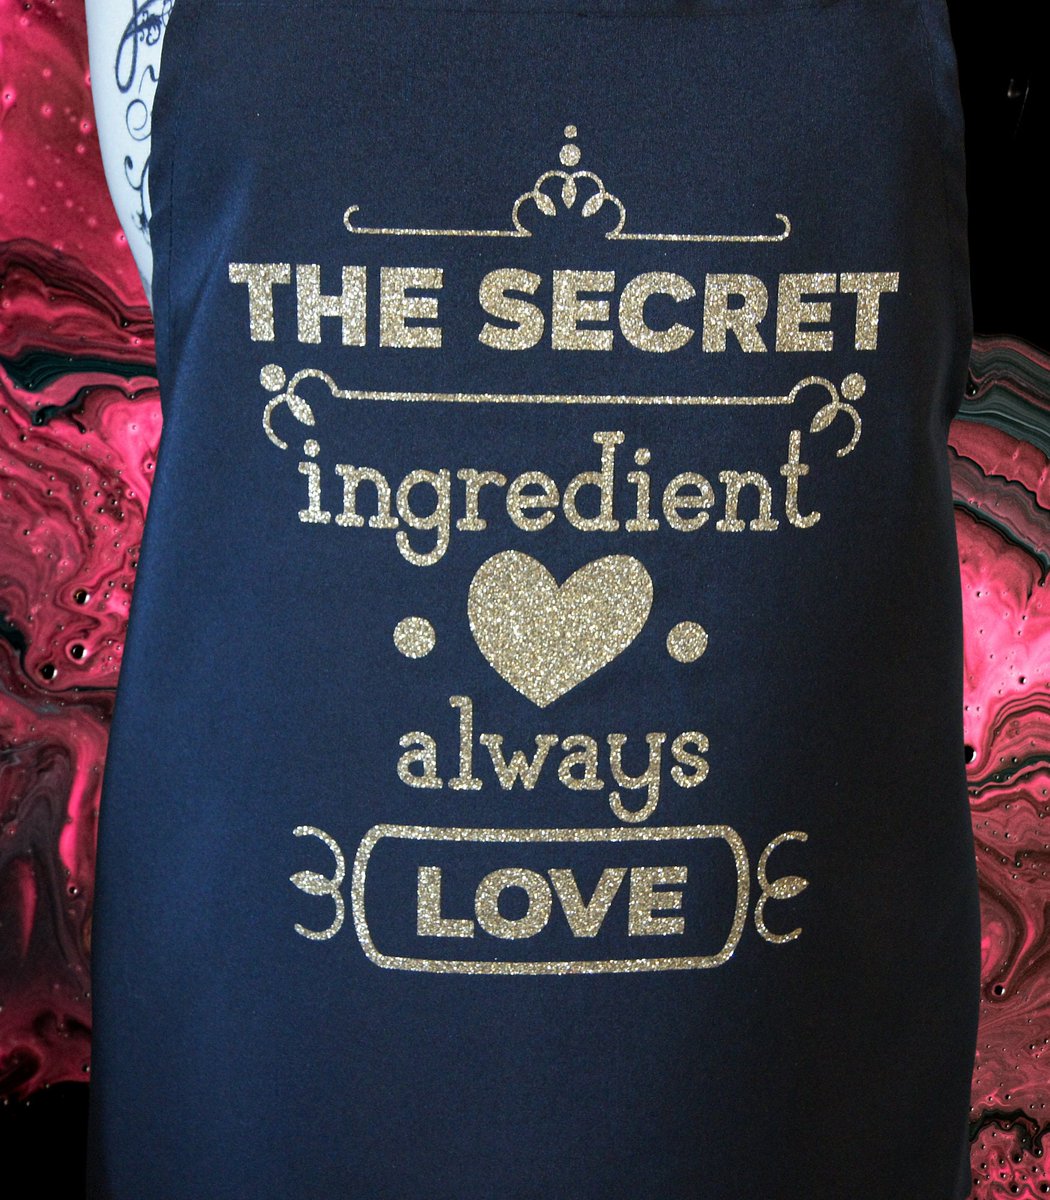 Excited to share the latest addition to my #etsy shop: Aprons, Funny Saying The Secret Ingredient Always Love, Unisex Apron. etsy.me/3CQ8f8U #black #polyester #gold #apronforwomen #funnyapron #giftformom #chefapron #funnygiftideas #bakersgift